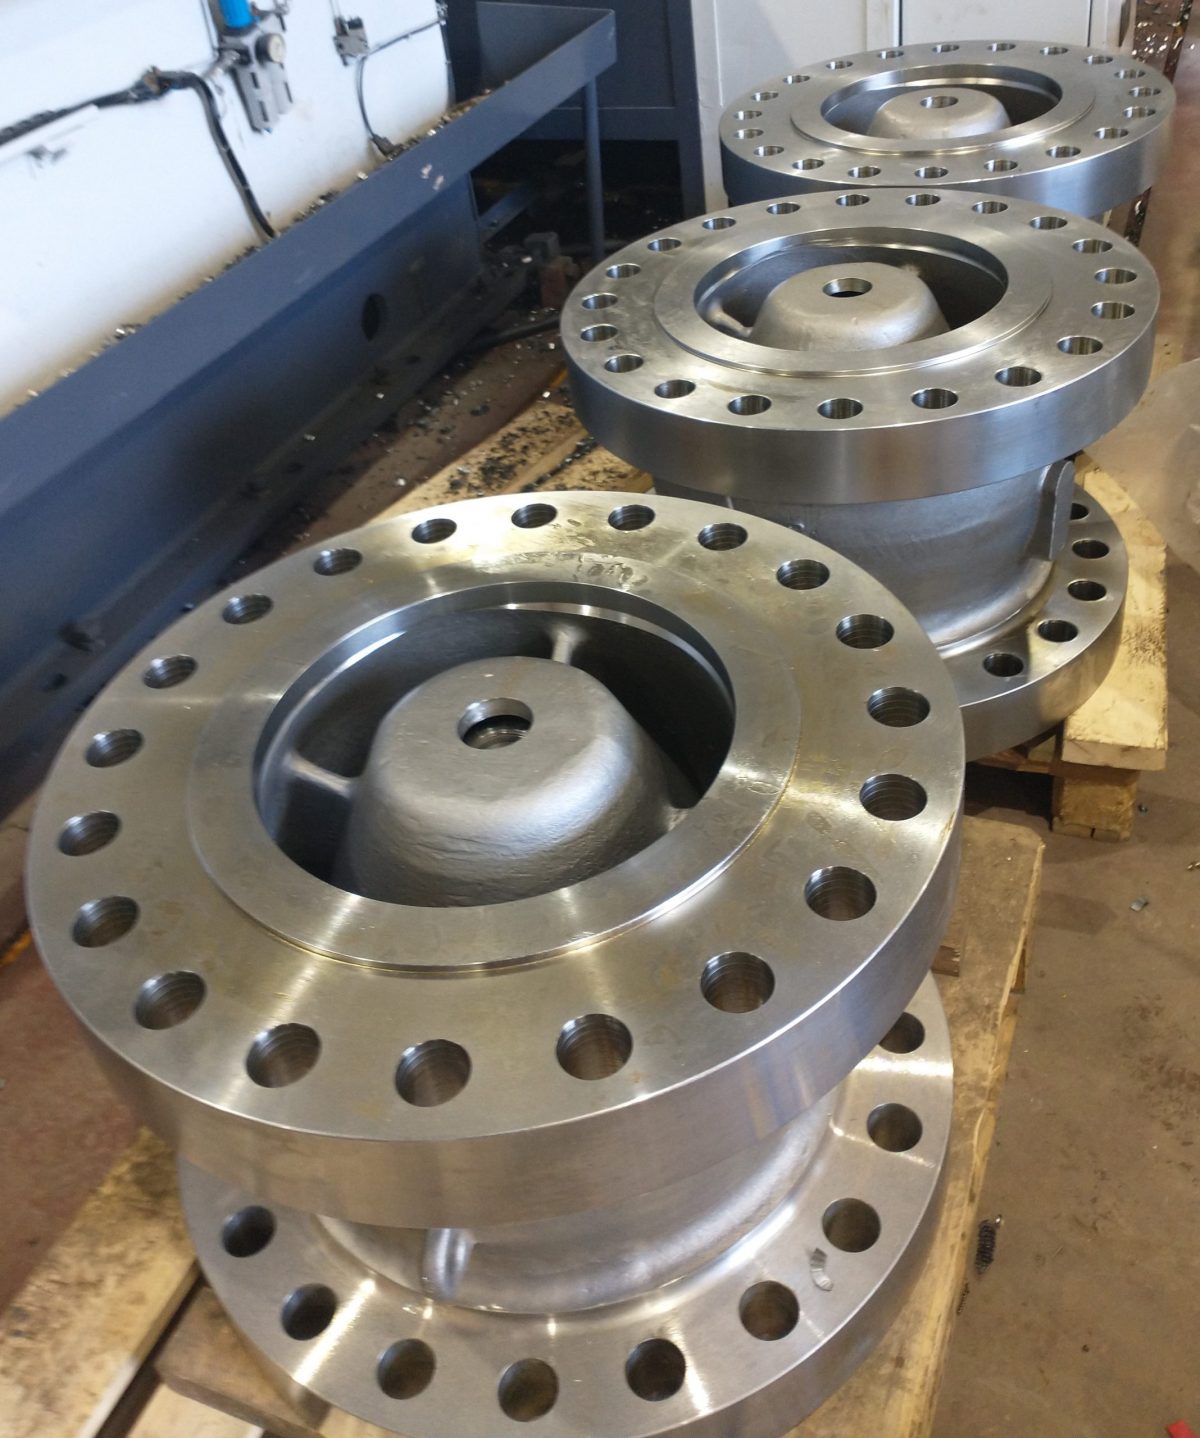 Axial Non-Slam Check Valves for an offshore gas project in Malaysia